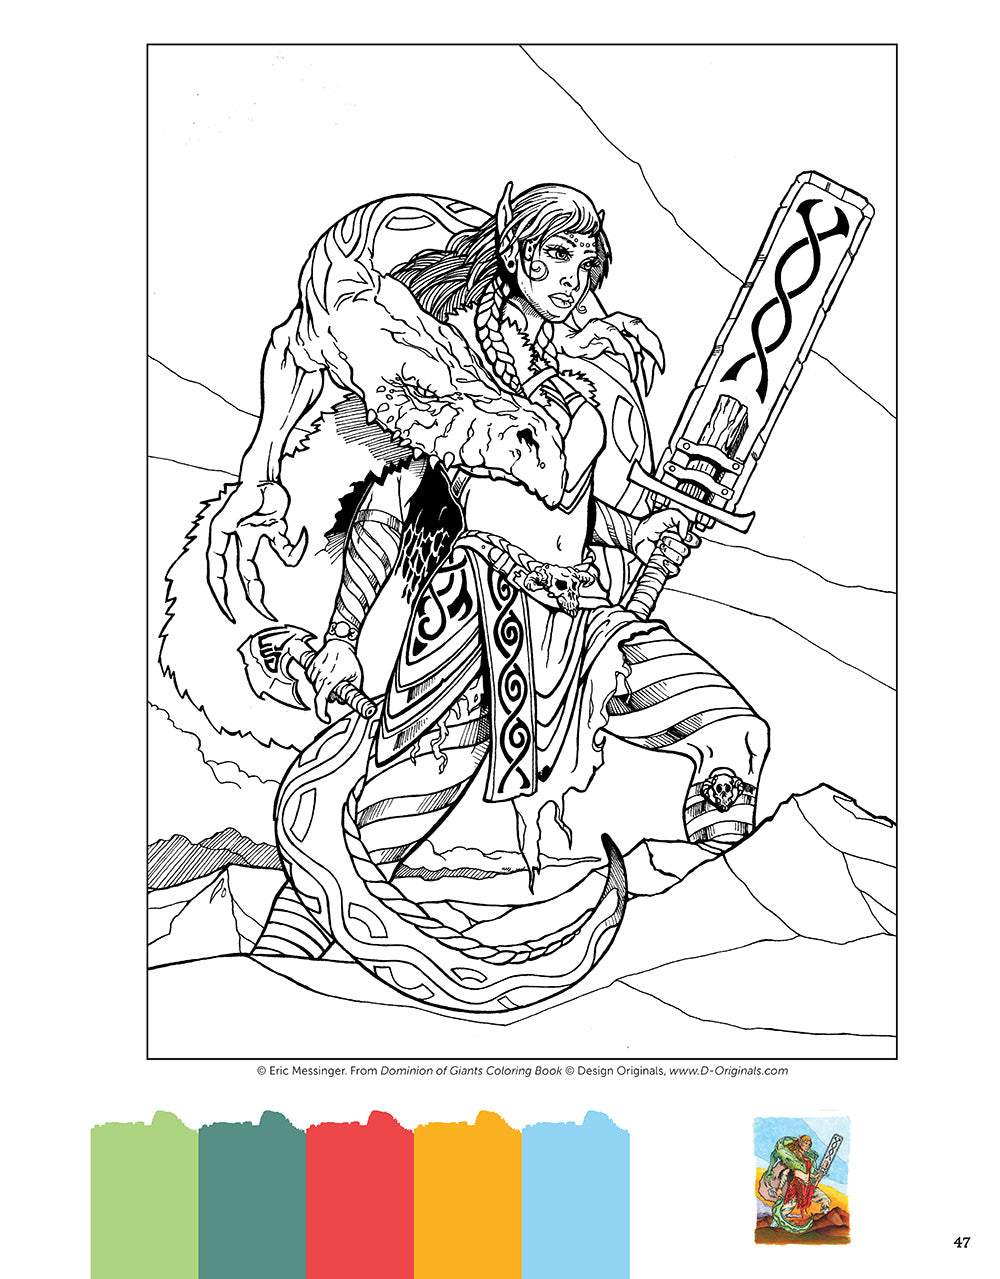 Dominion of Giants Coloring Book